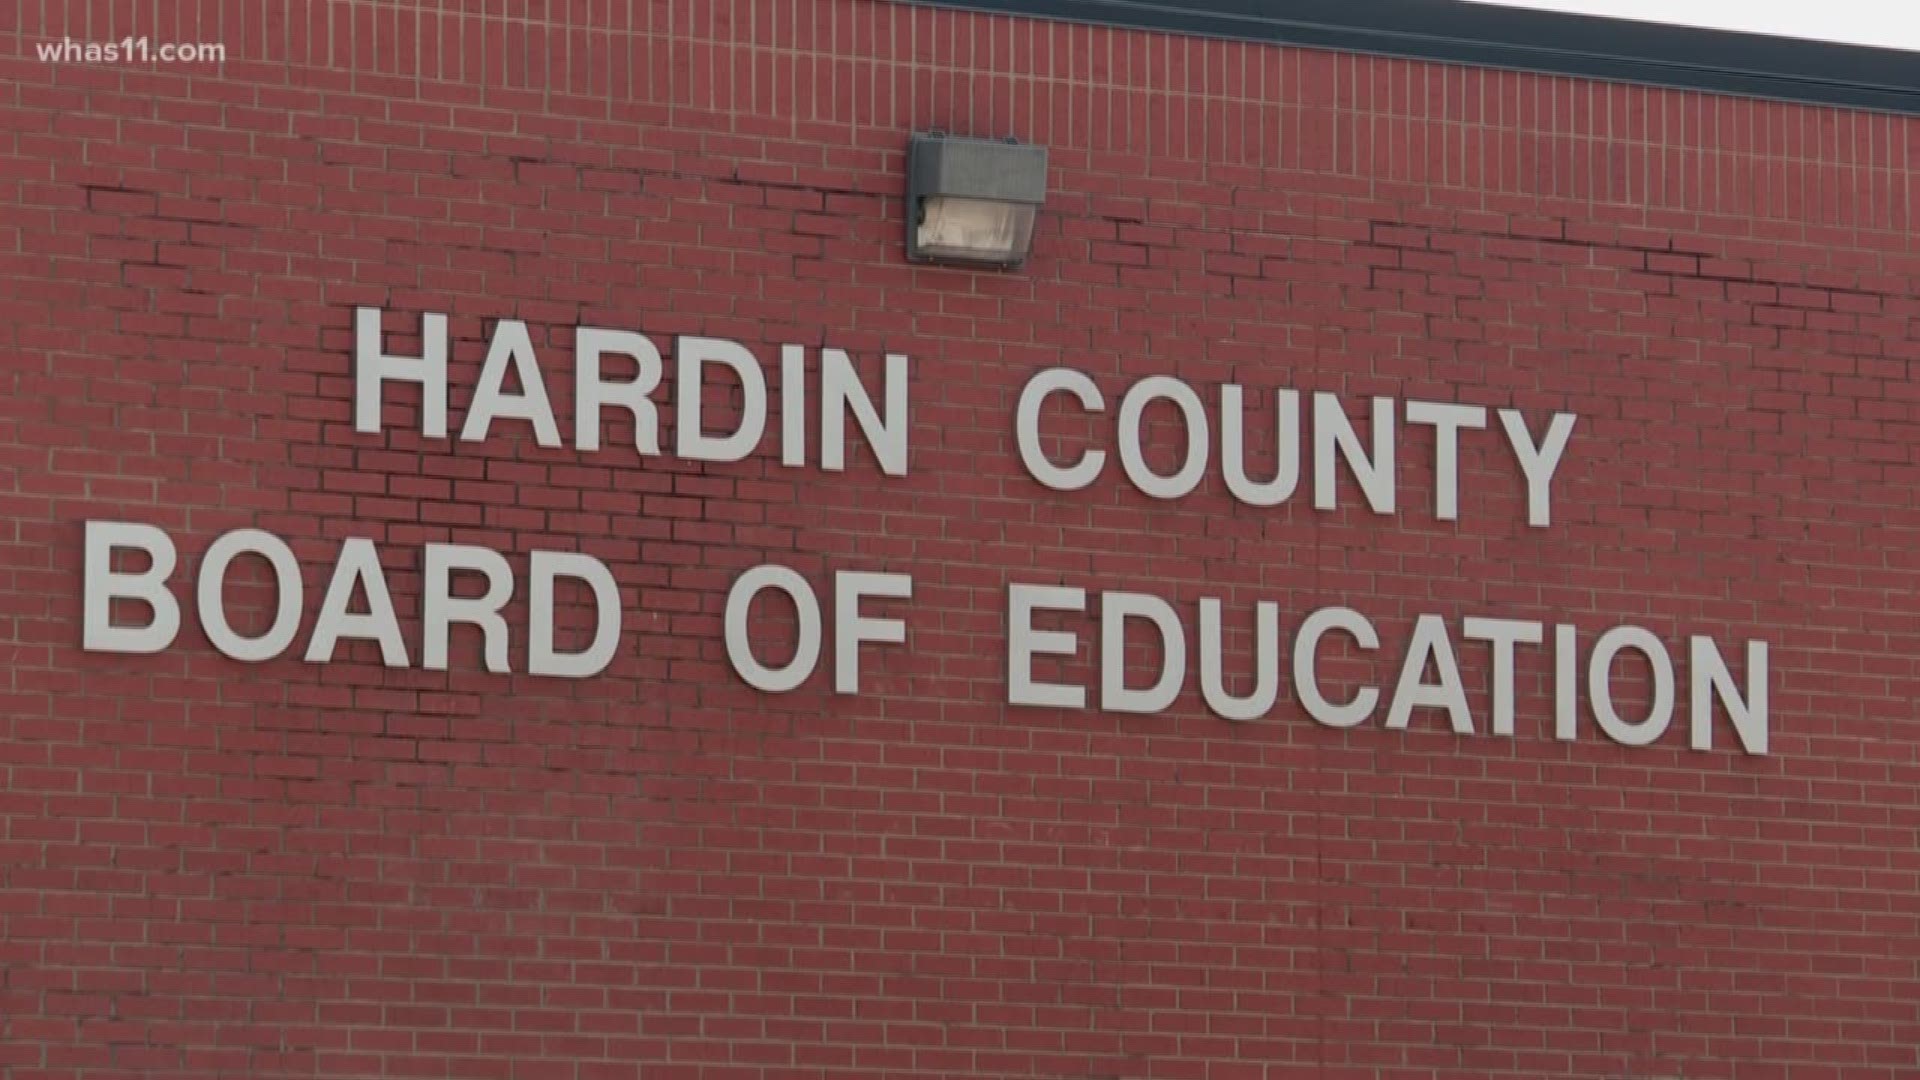 A planning committee in Hardin County is meeting tonight to discuss possible changes that could potentially close some elementary schools.